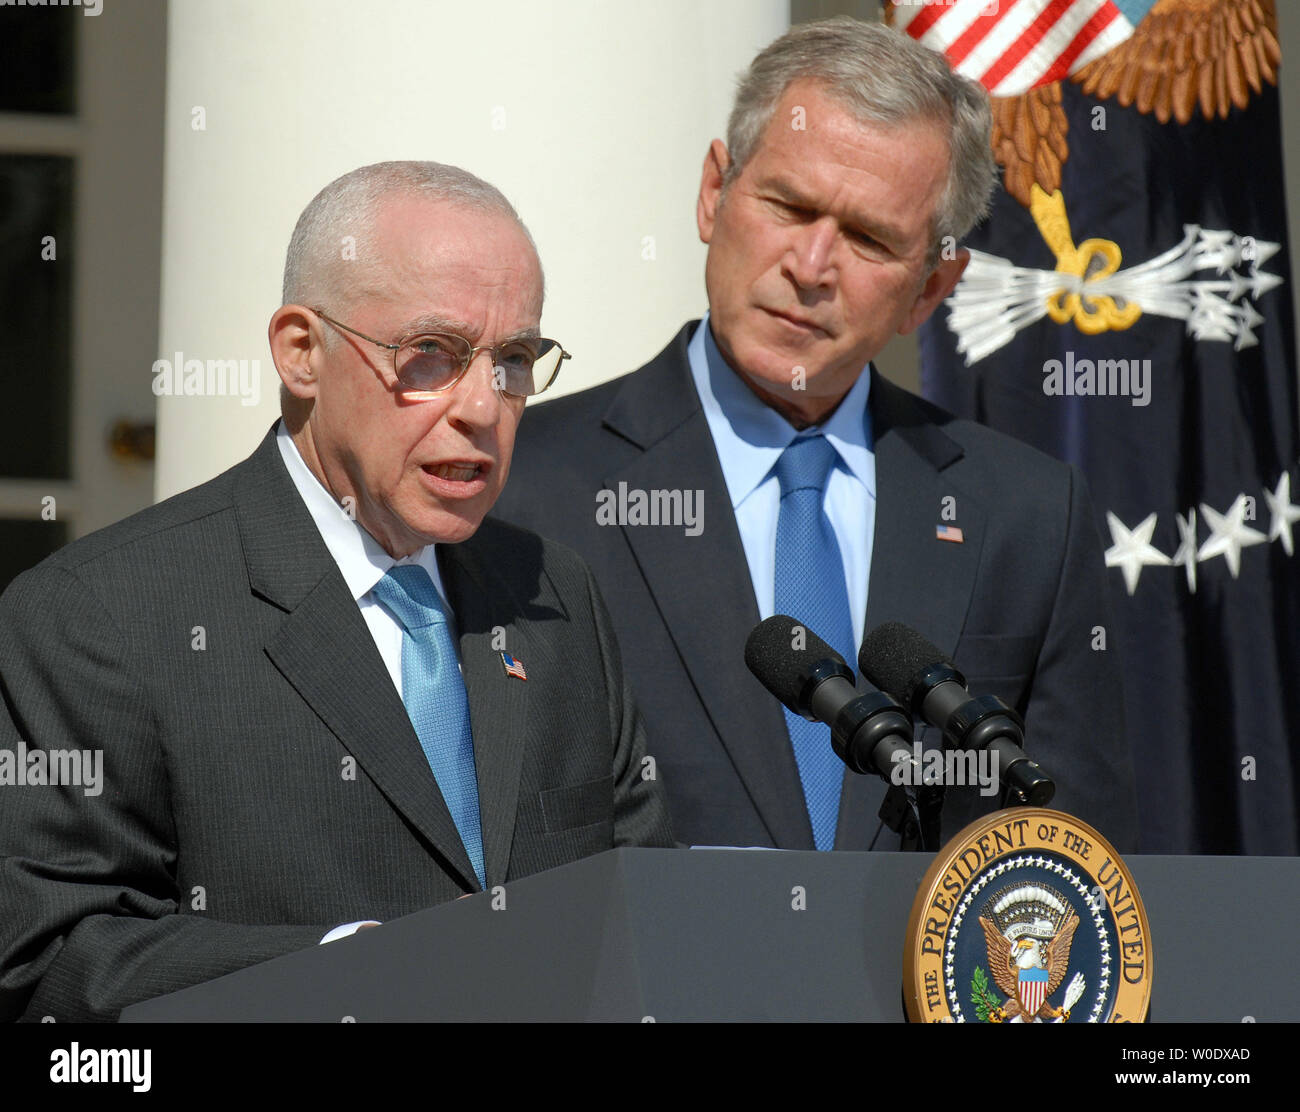 Michael B. Mukasey, a retired federal judge from New York, (L) speaks after U.S. President George W. Bush announced his nomination of Mukasey to replace Alberto Gonzales as attorney general in the Rose Garden of the White House on September 17, 2007.   (UPI Photo/Roger L. Wollenberg) Stock Photo